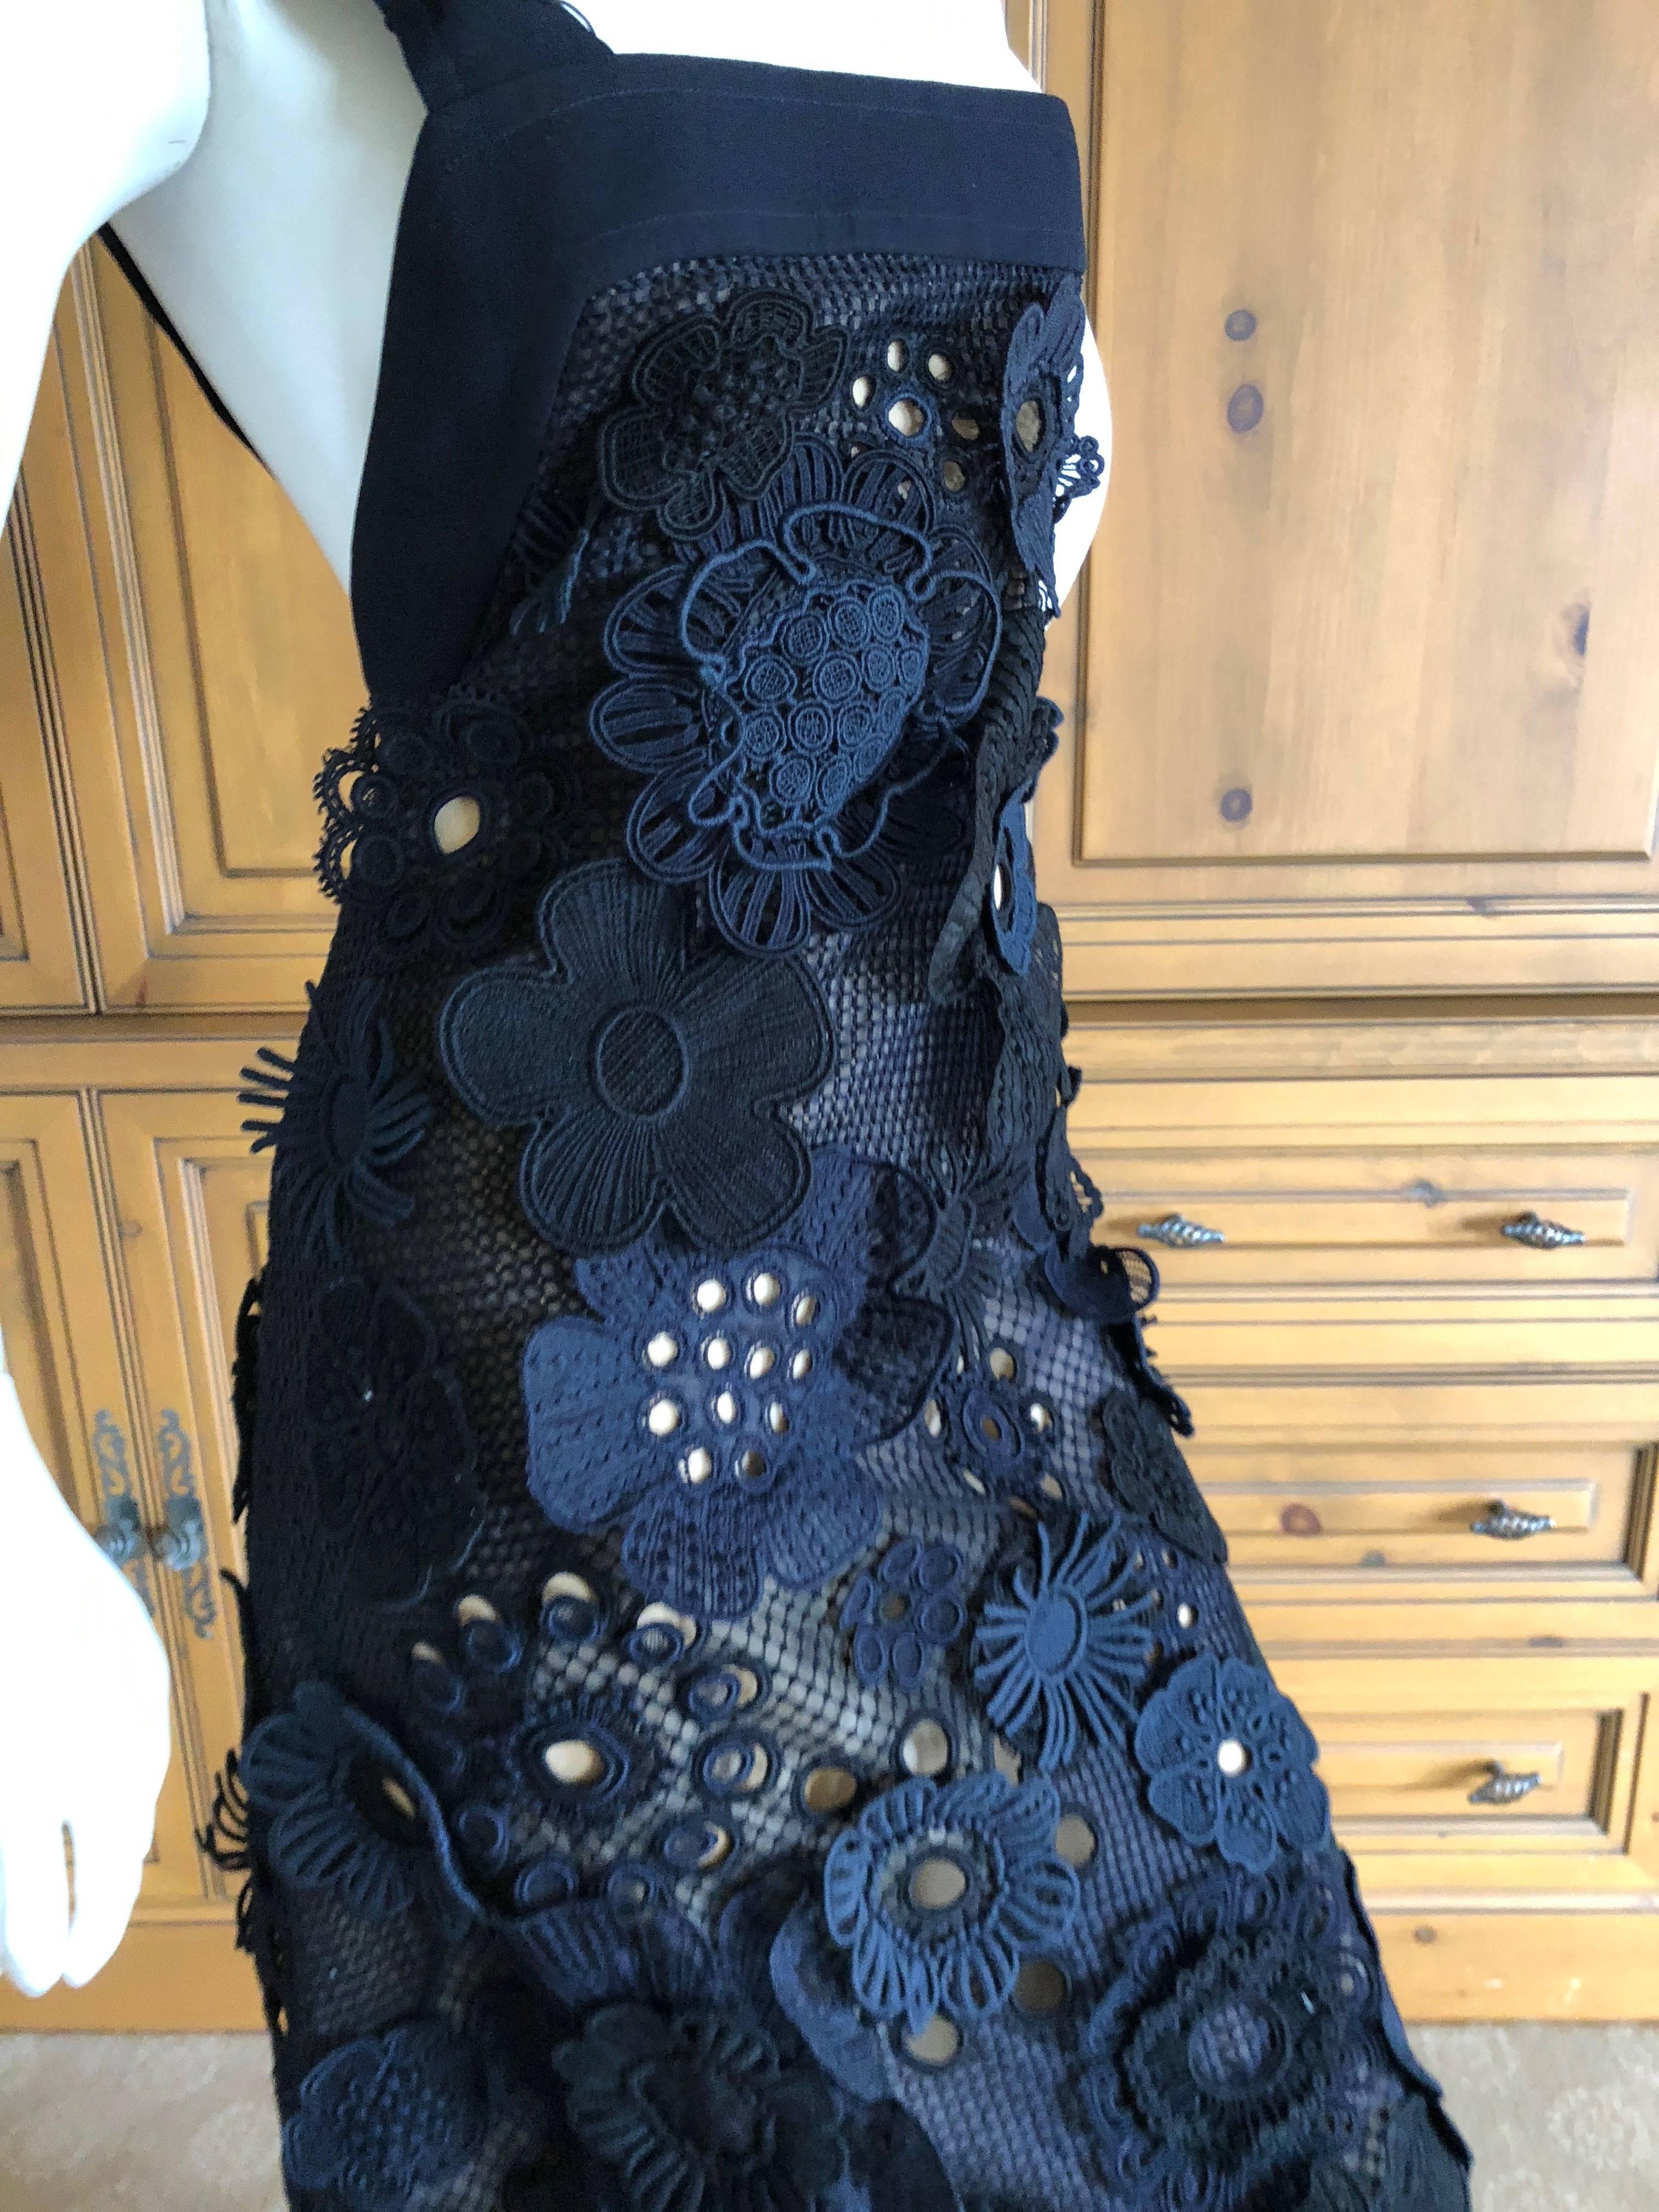 Chloe by Clare Waight Keller Spring 2017 Sheer Lace Florette Dress New 3